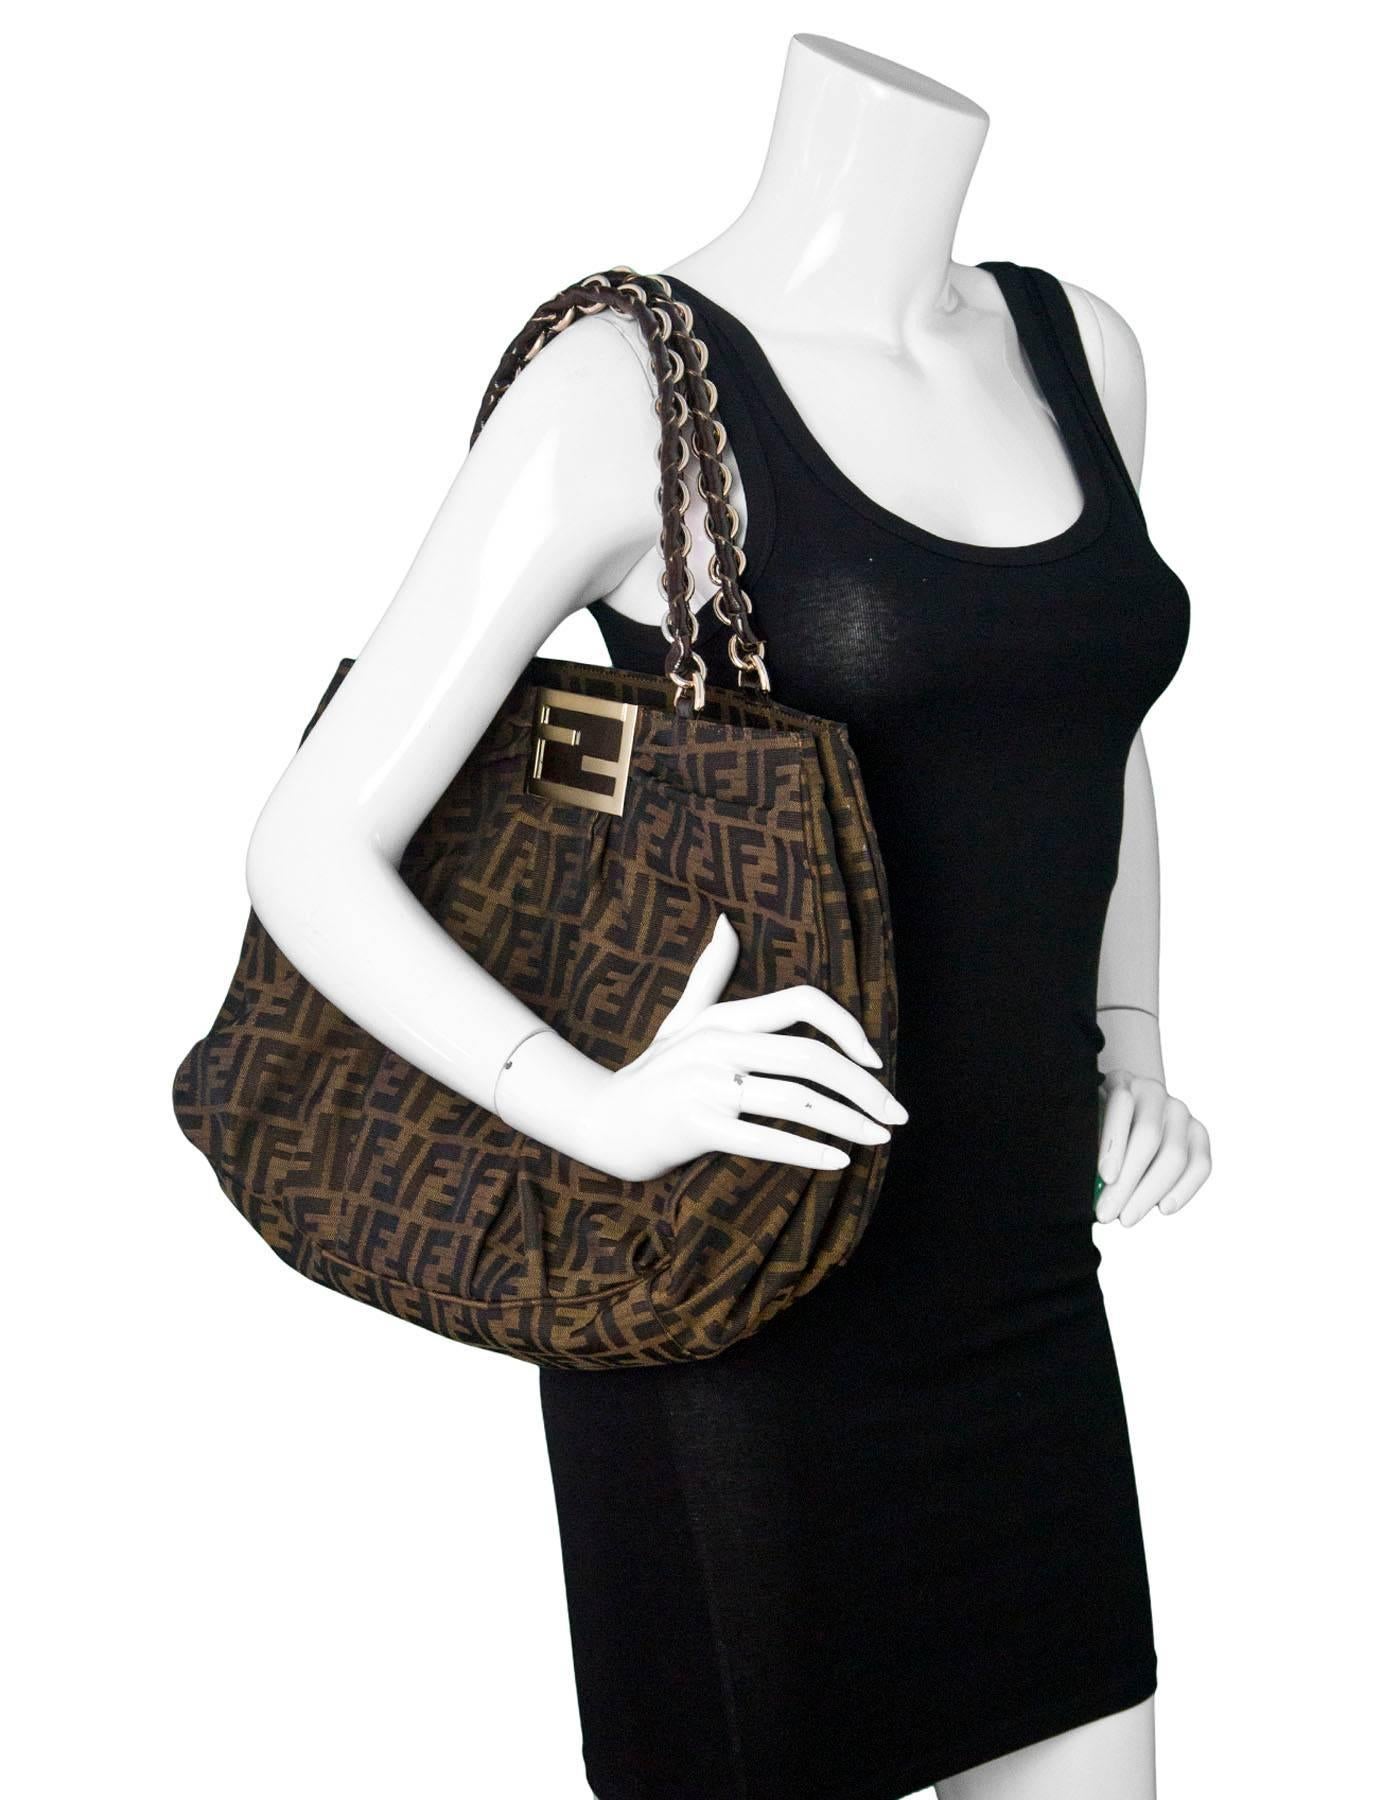 Fendi Tobacco Brown Zucca Borsa Mia Tote
Features woven straps

Made In: Italy 
Color: Brown
Hardware: Goldtone
Materials: Canvas, patent leather, metal
Lining: Tan textile
Closure/opening: Open top
Exterior Pockets: None
Interior Pockets: Center